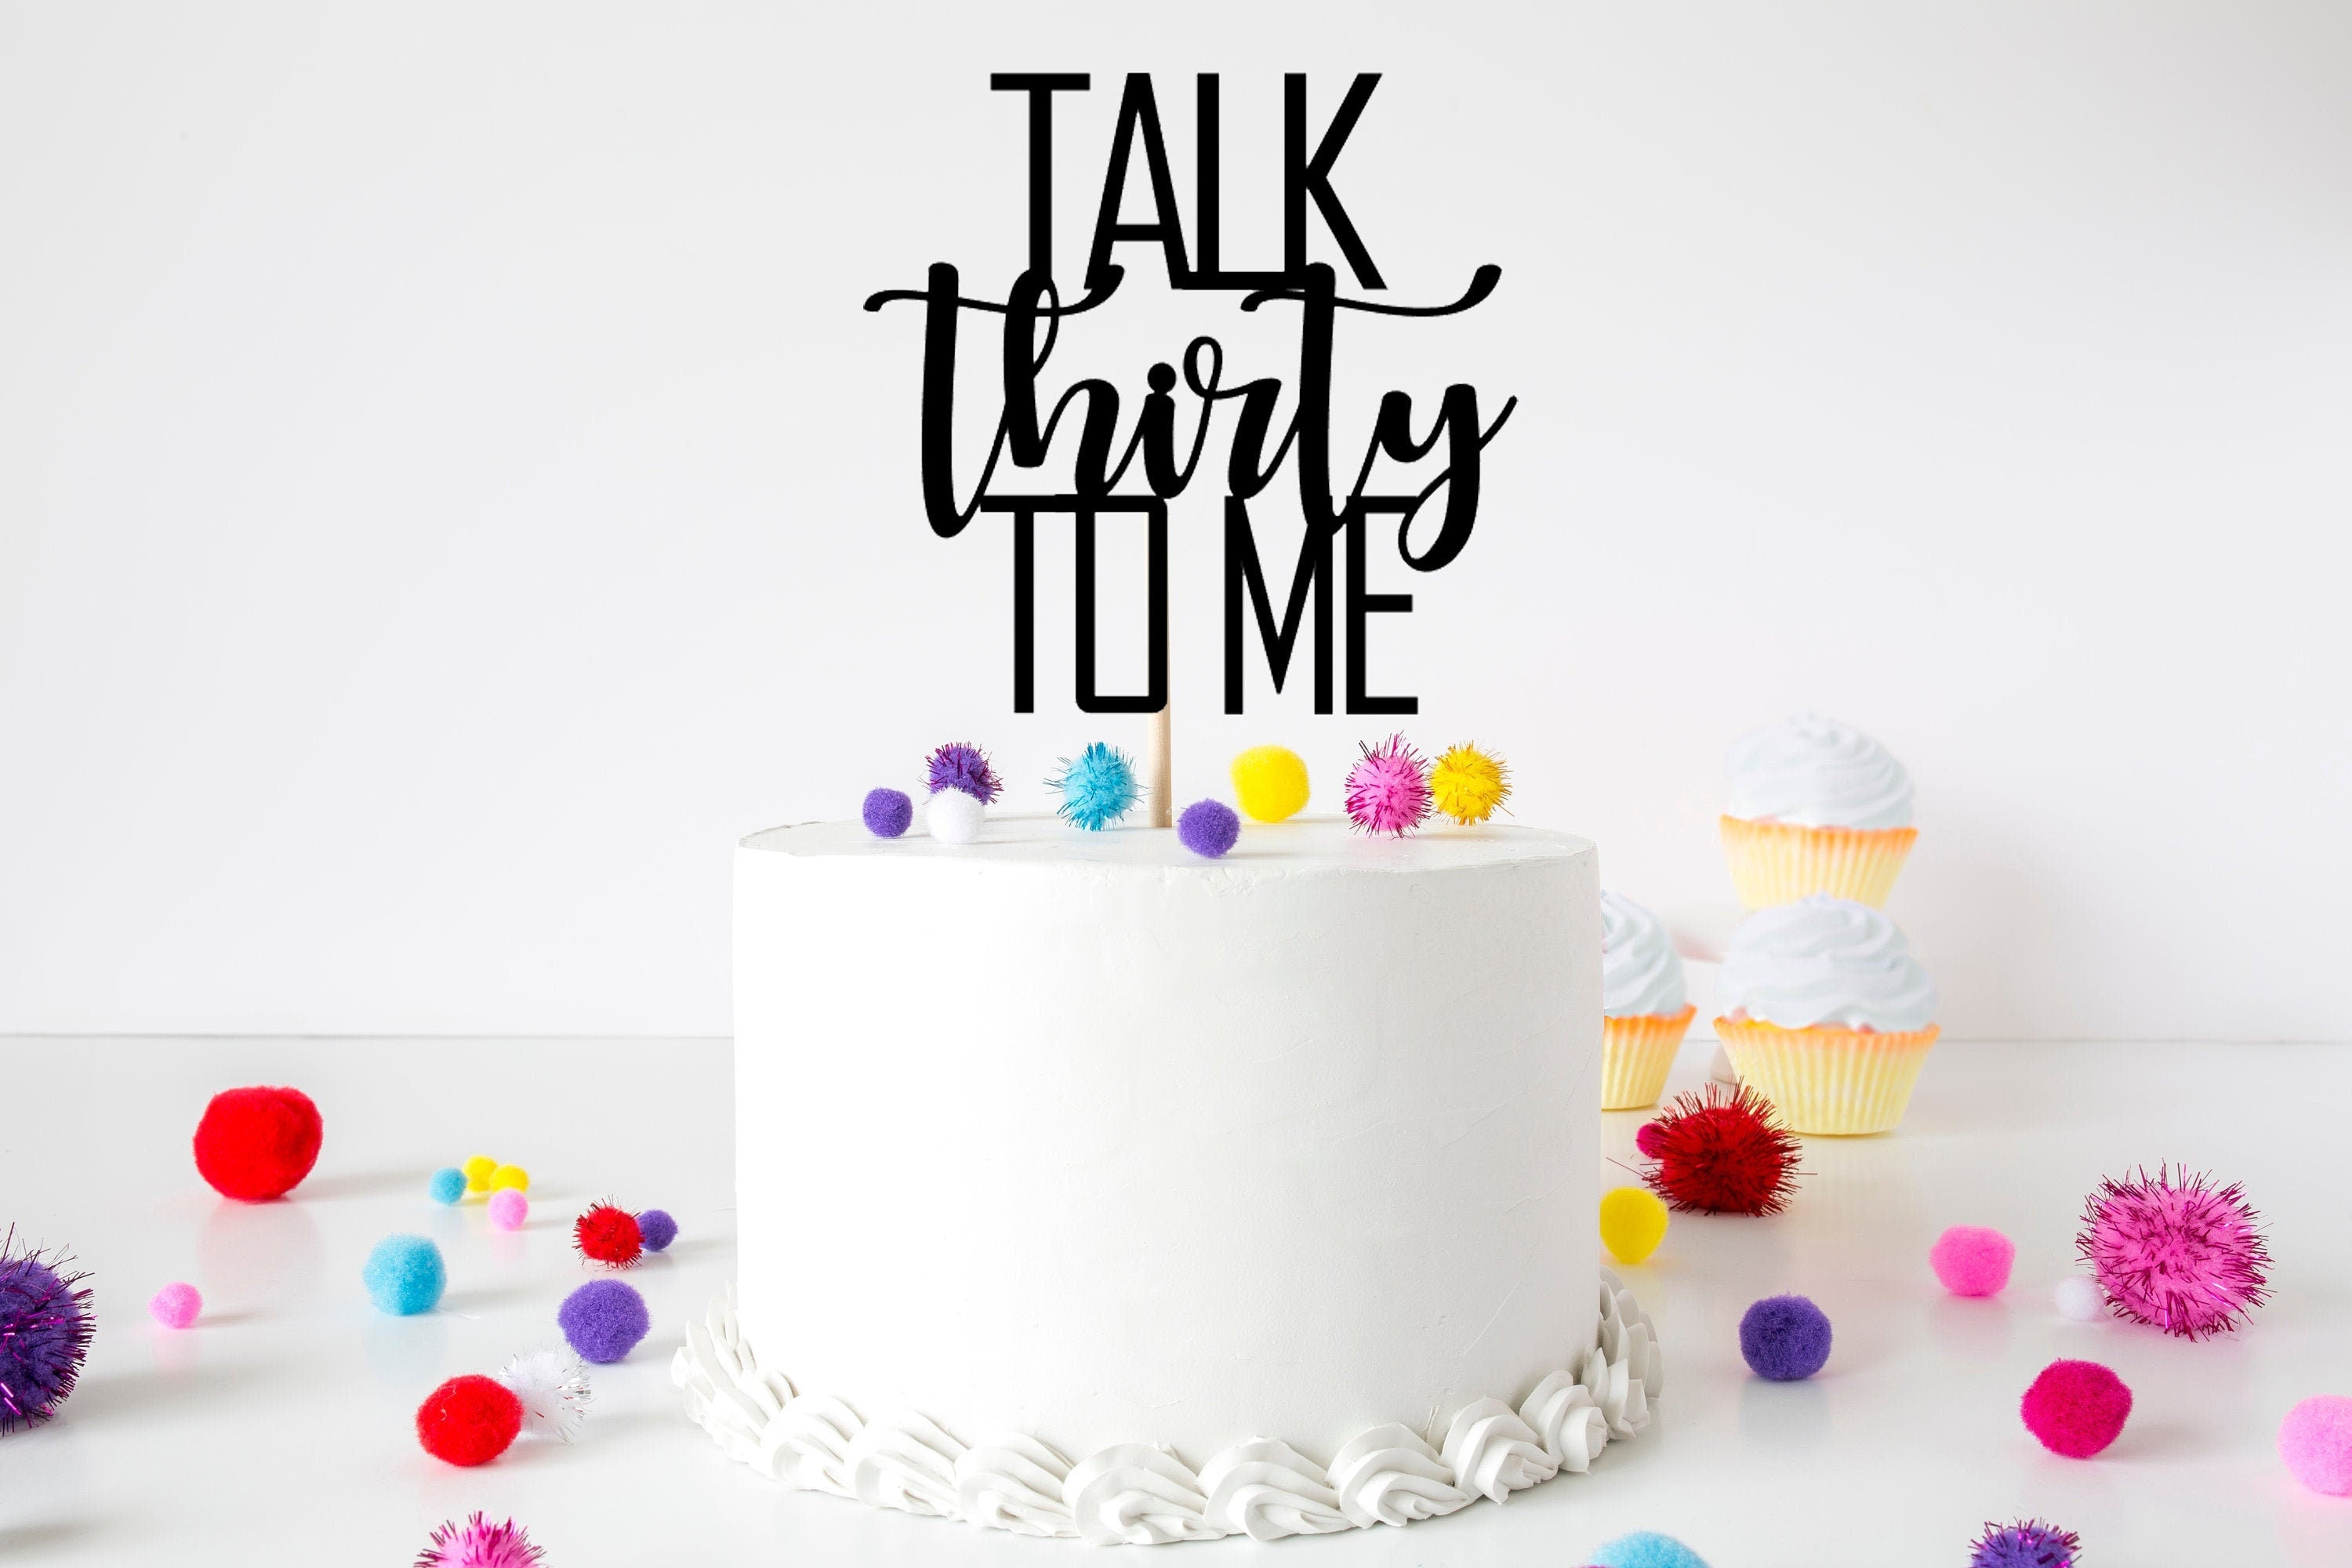 Let's talk about cake! - English - Chatterbug Community